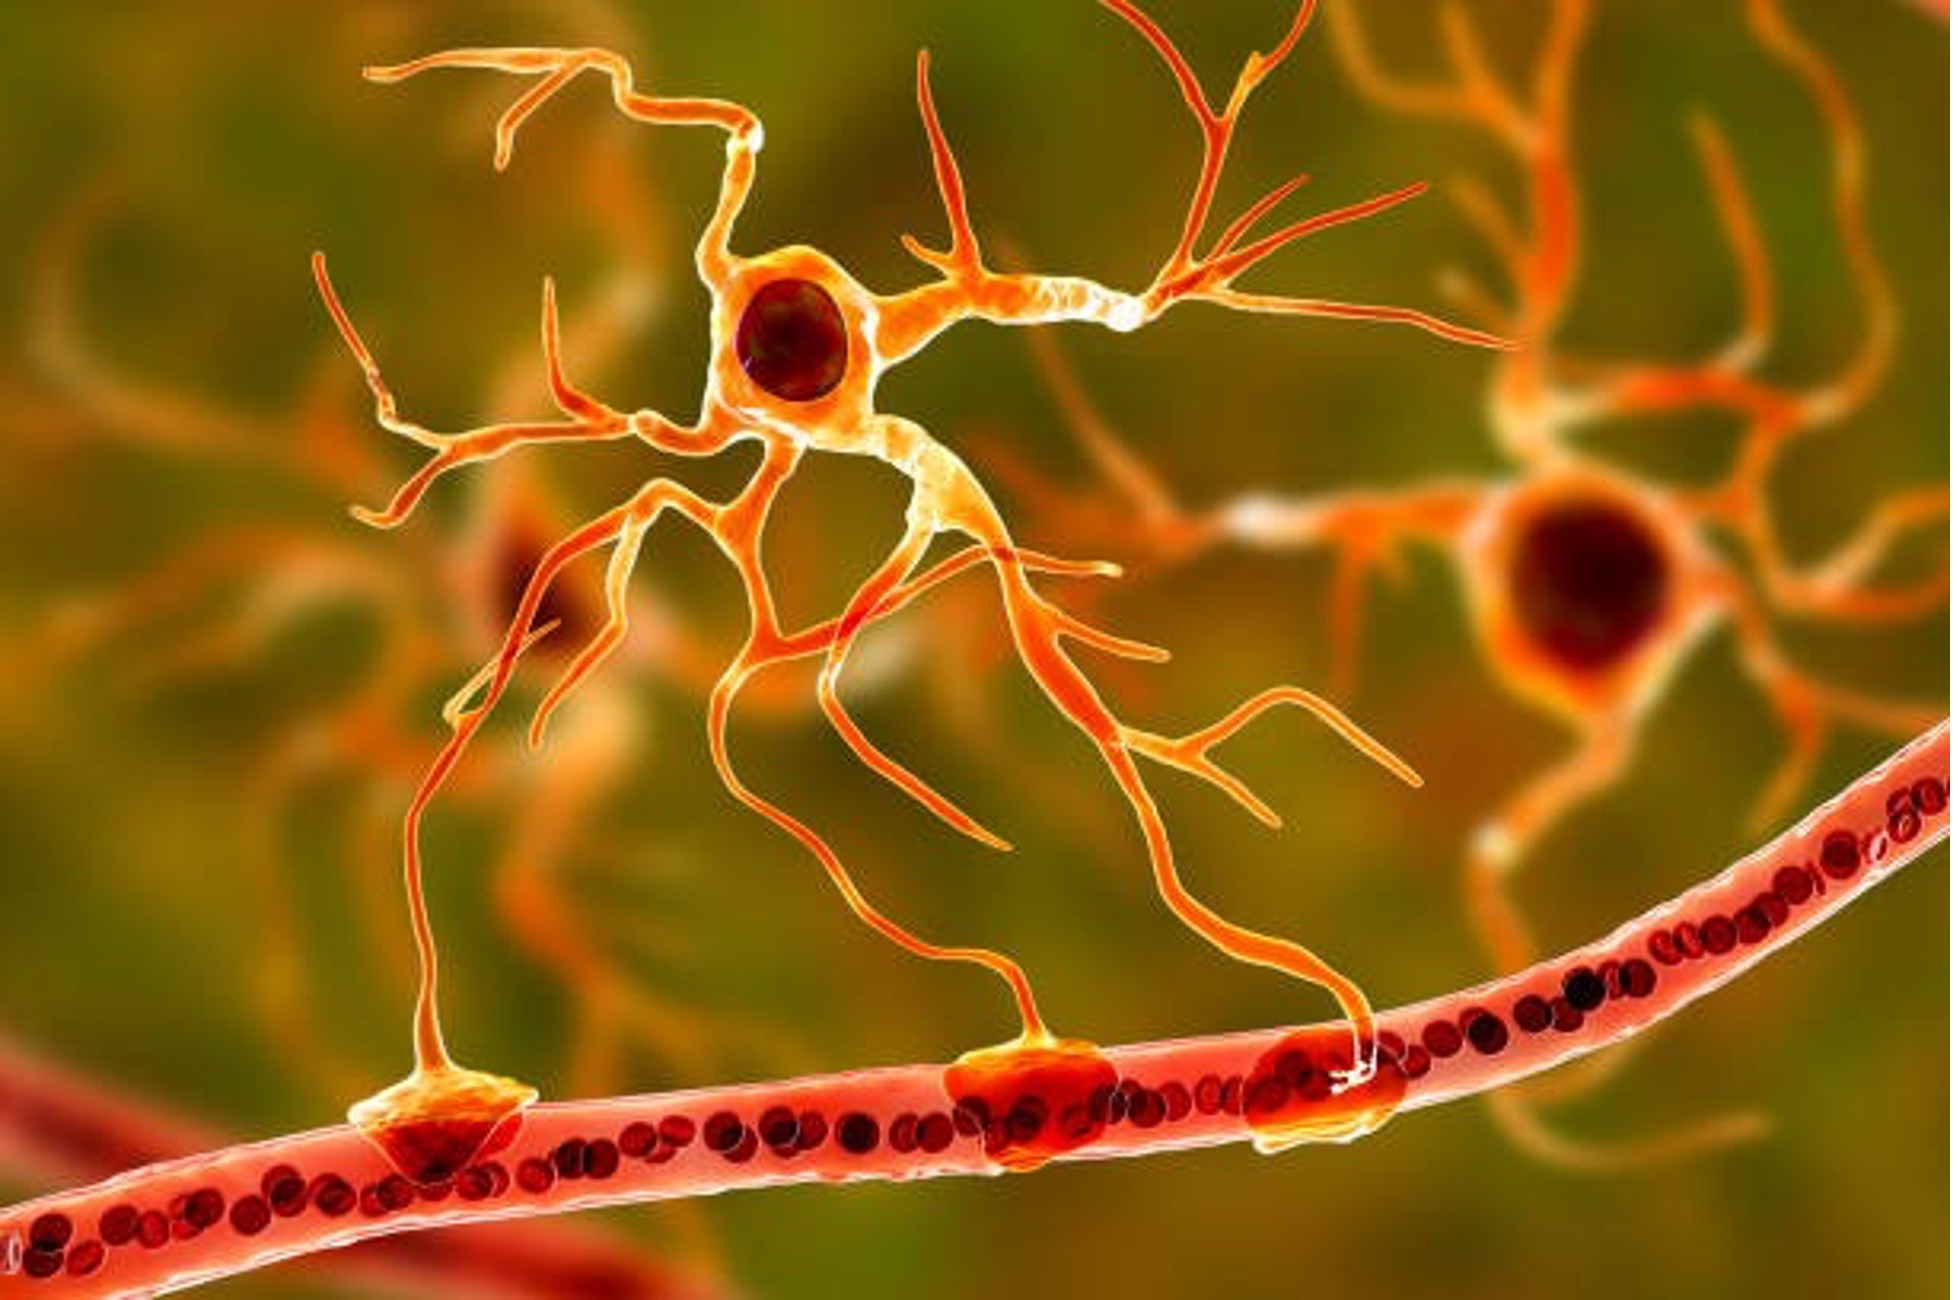 What happens if one day we lose a Neuron?